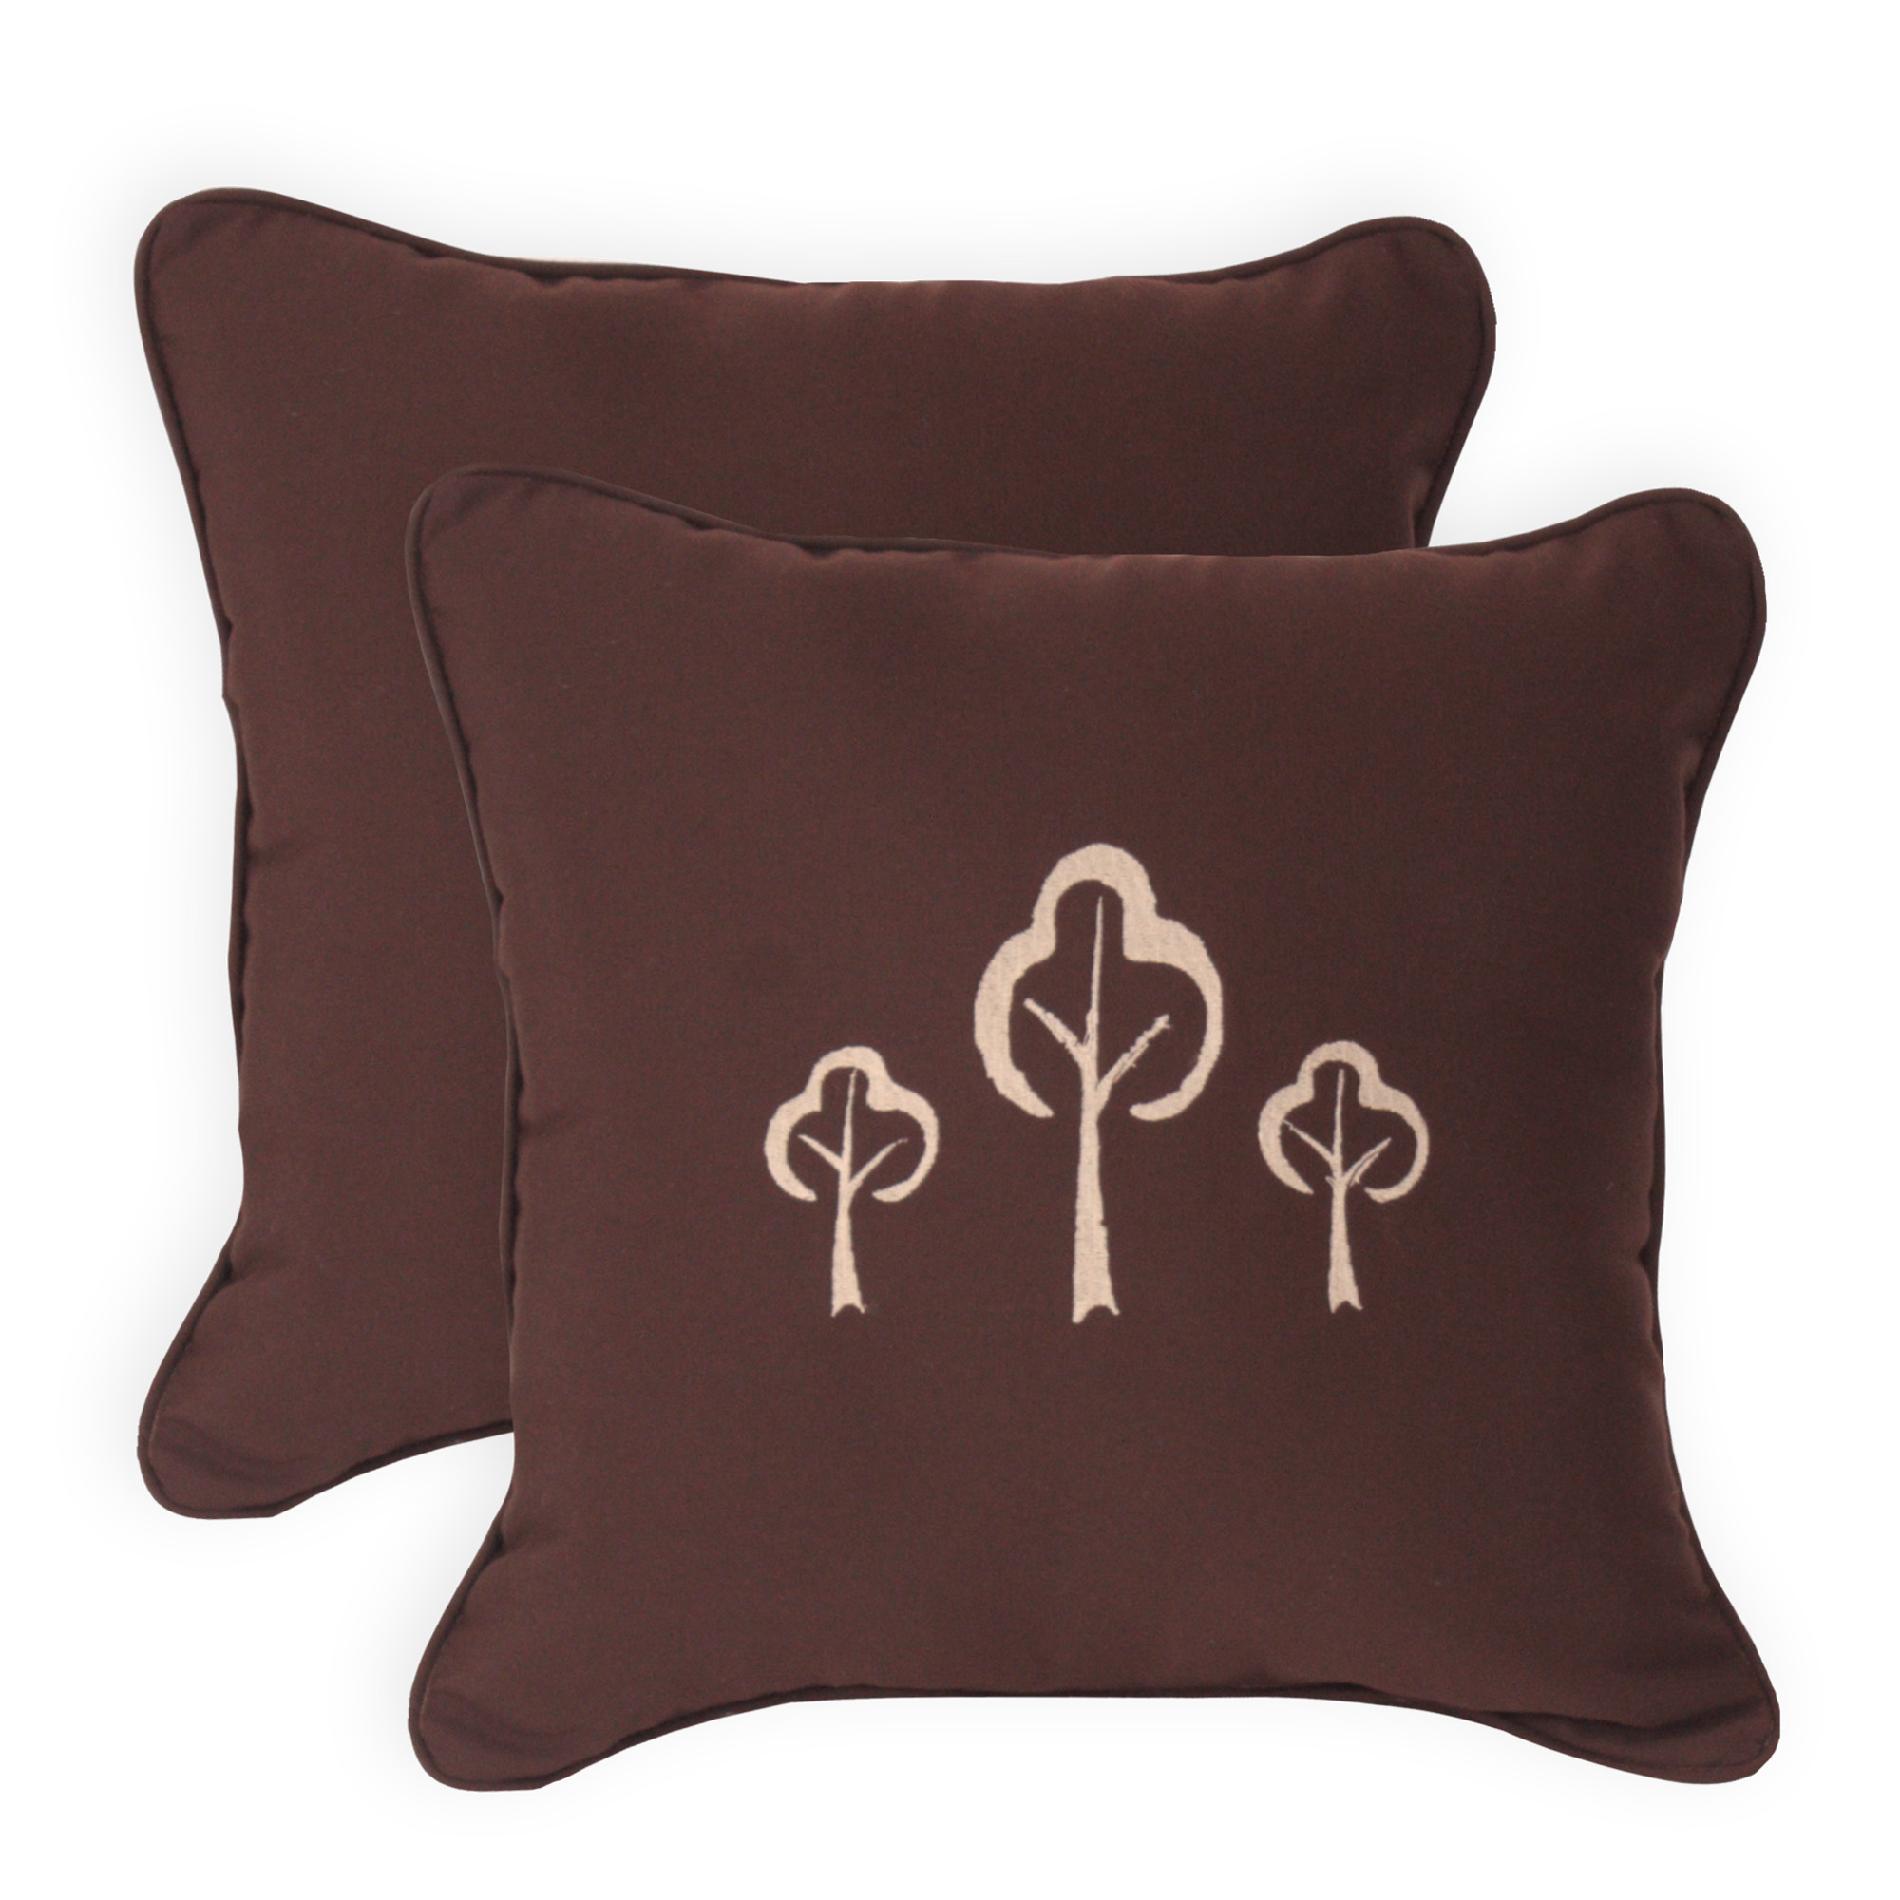 Pack of 2 Deluxe (16") Embroidered Tree Silhouette Pillows in Canvas Bay Brown OR Canvas Brick